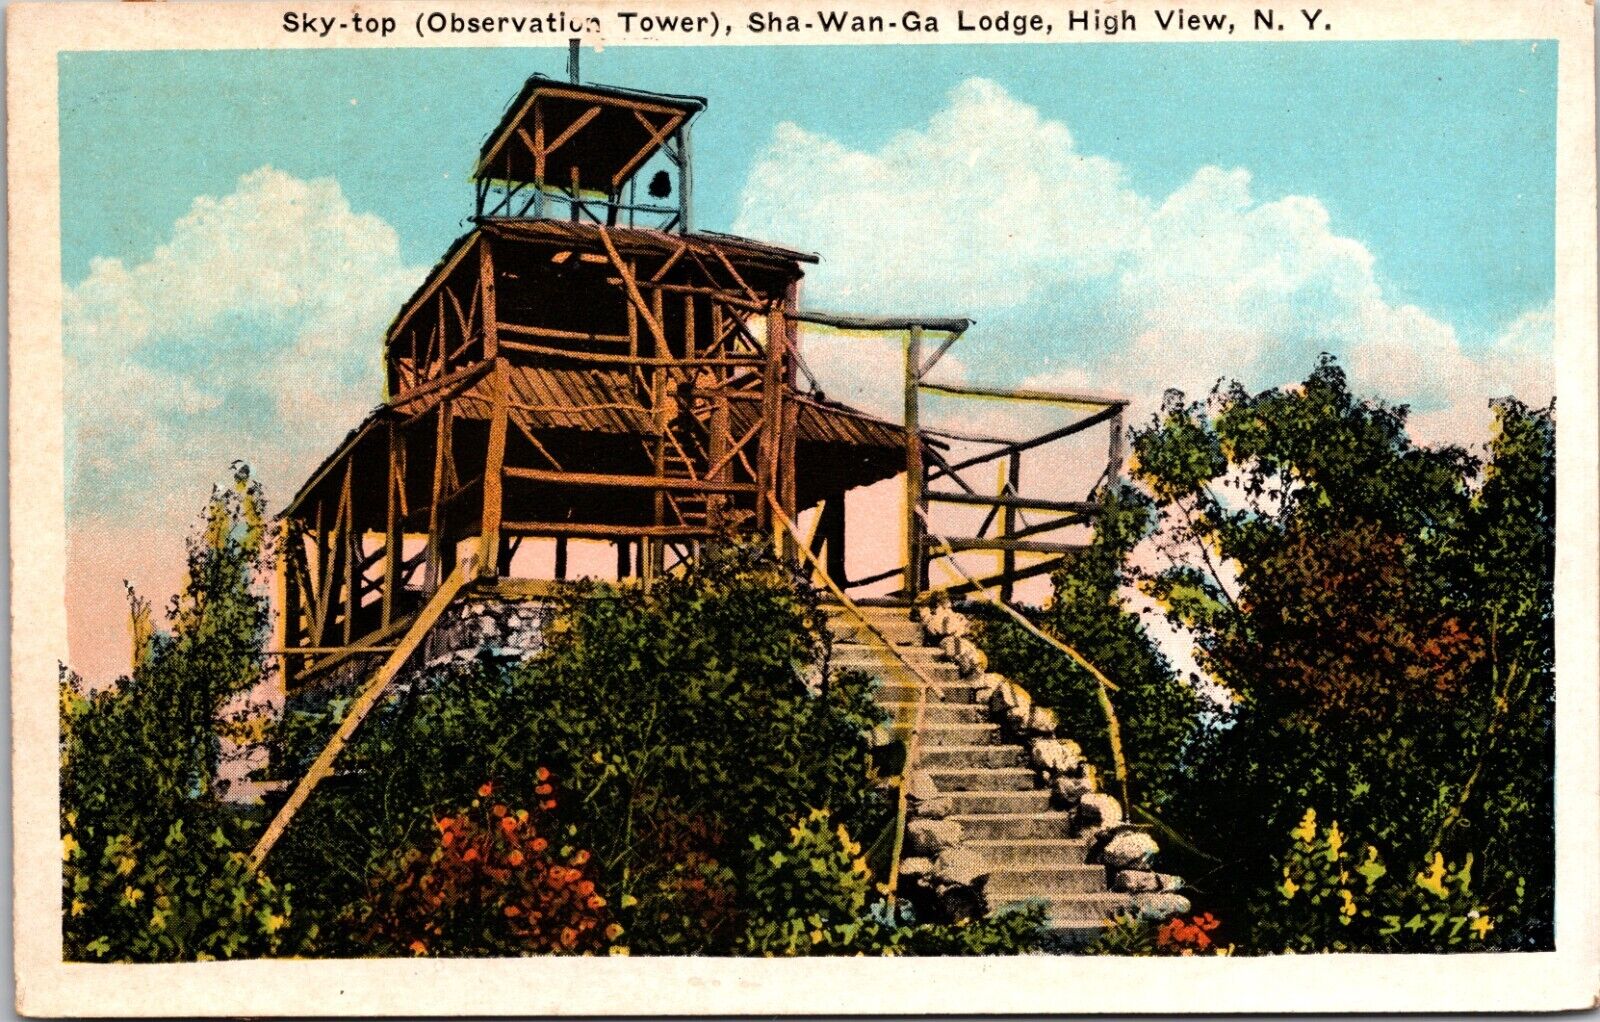 HIGH VIEW, New York Postcard SHA-WAN-GA LODGE -Observation Tower-Posted WB